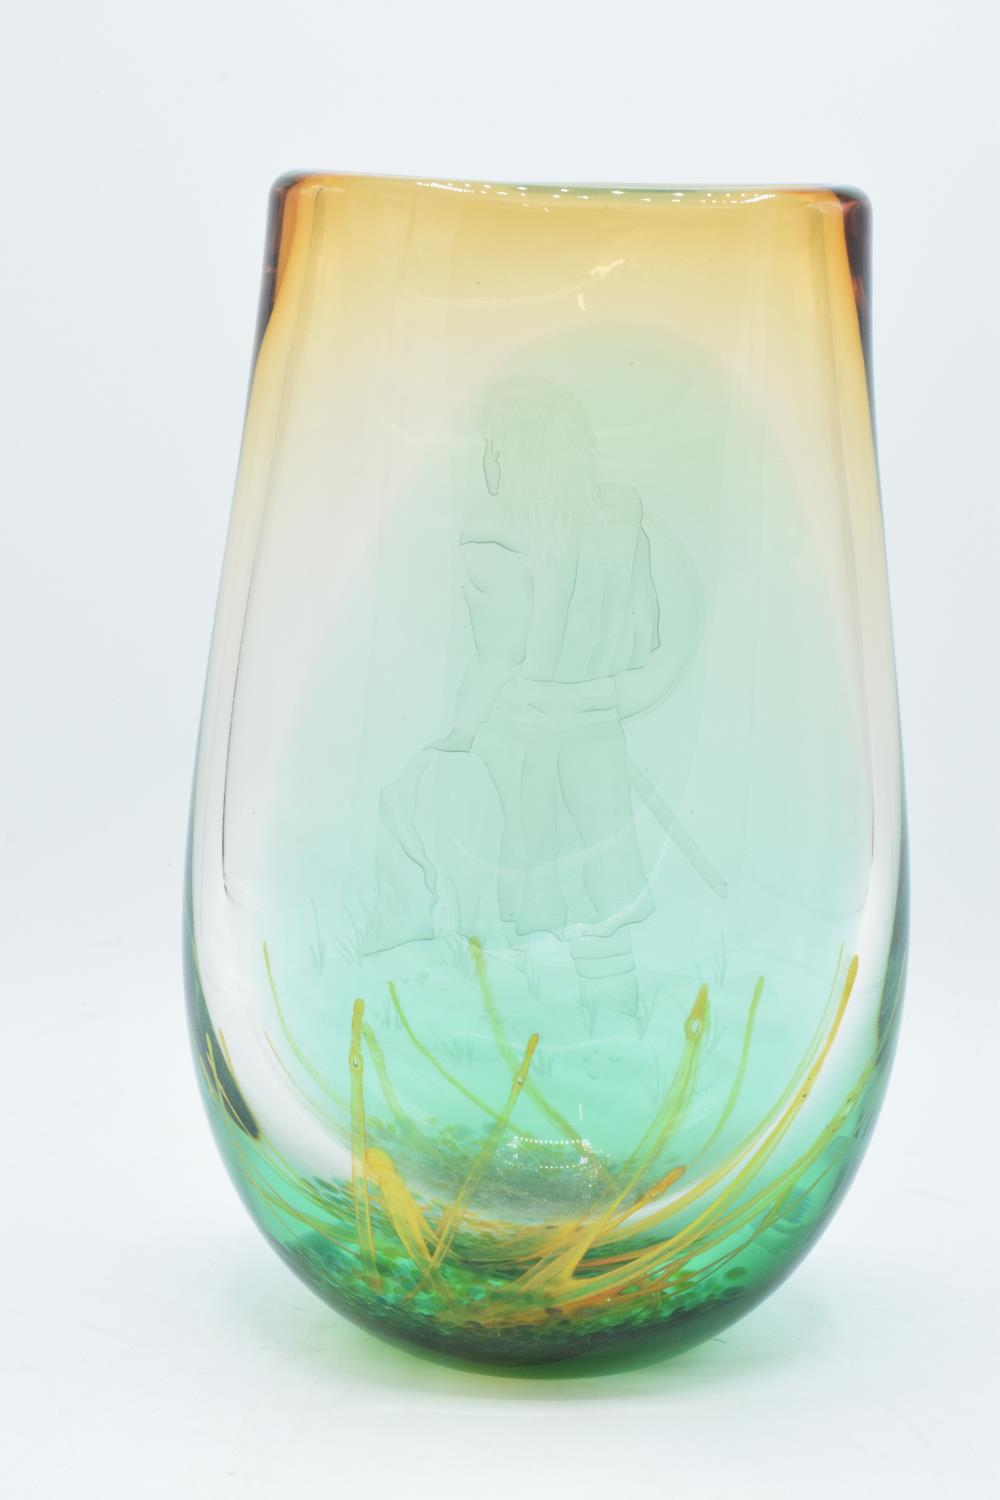 Caithness one-off glass vase 'Highlander' 2002, signed to base by the artist. 27cm tall. - Image 3 of 10